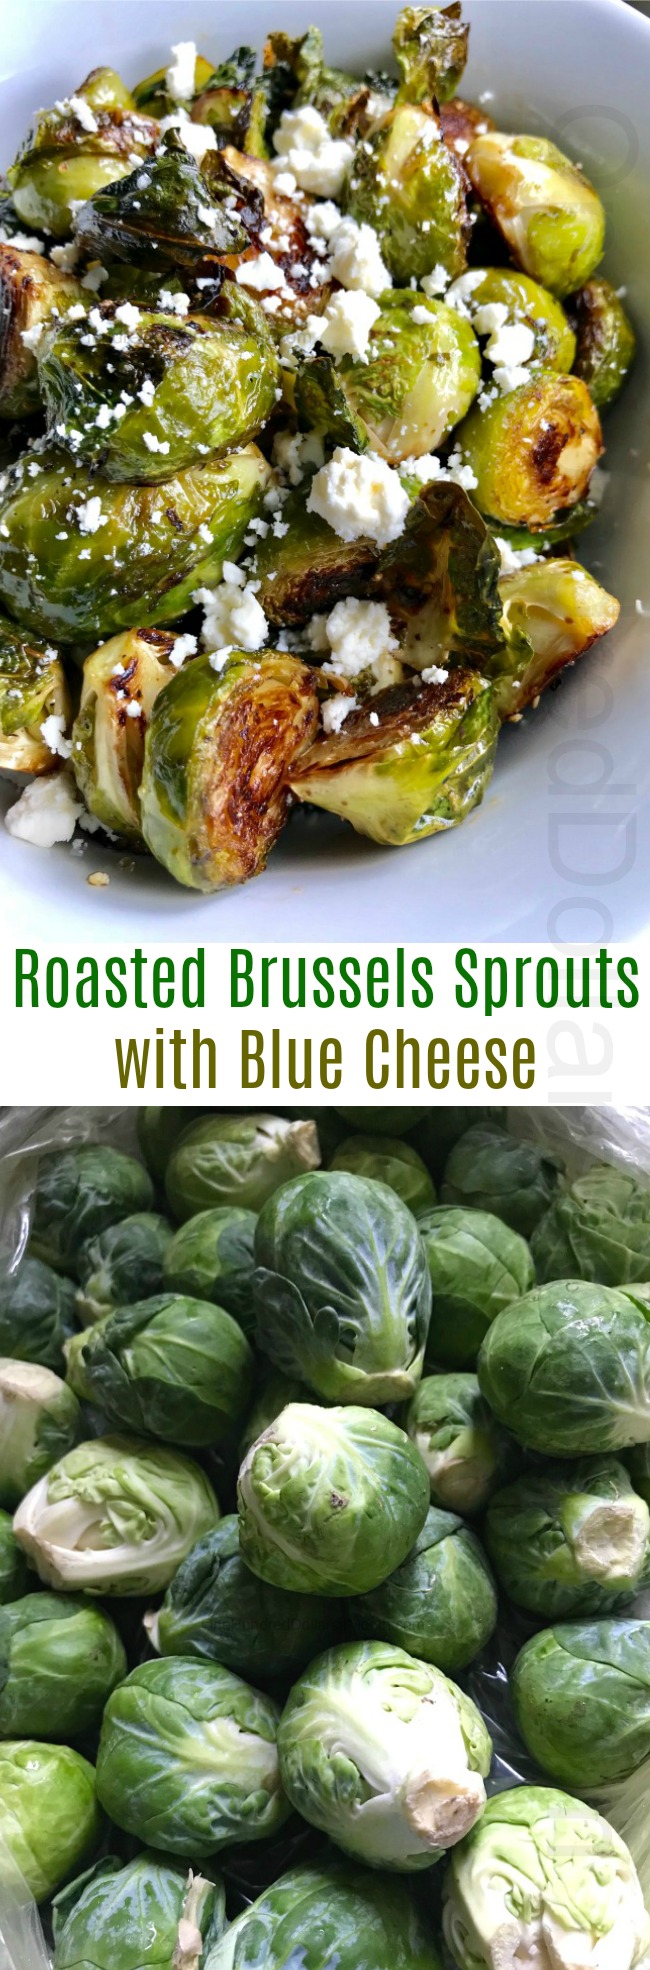 Roasted Brussels Sprouts with Blue Cheese